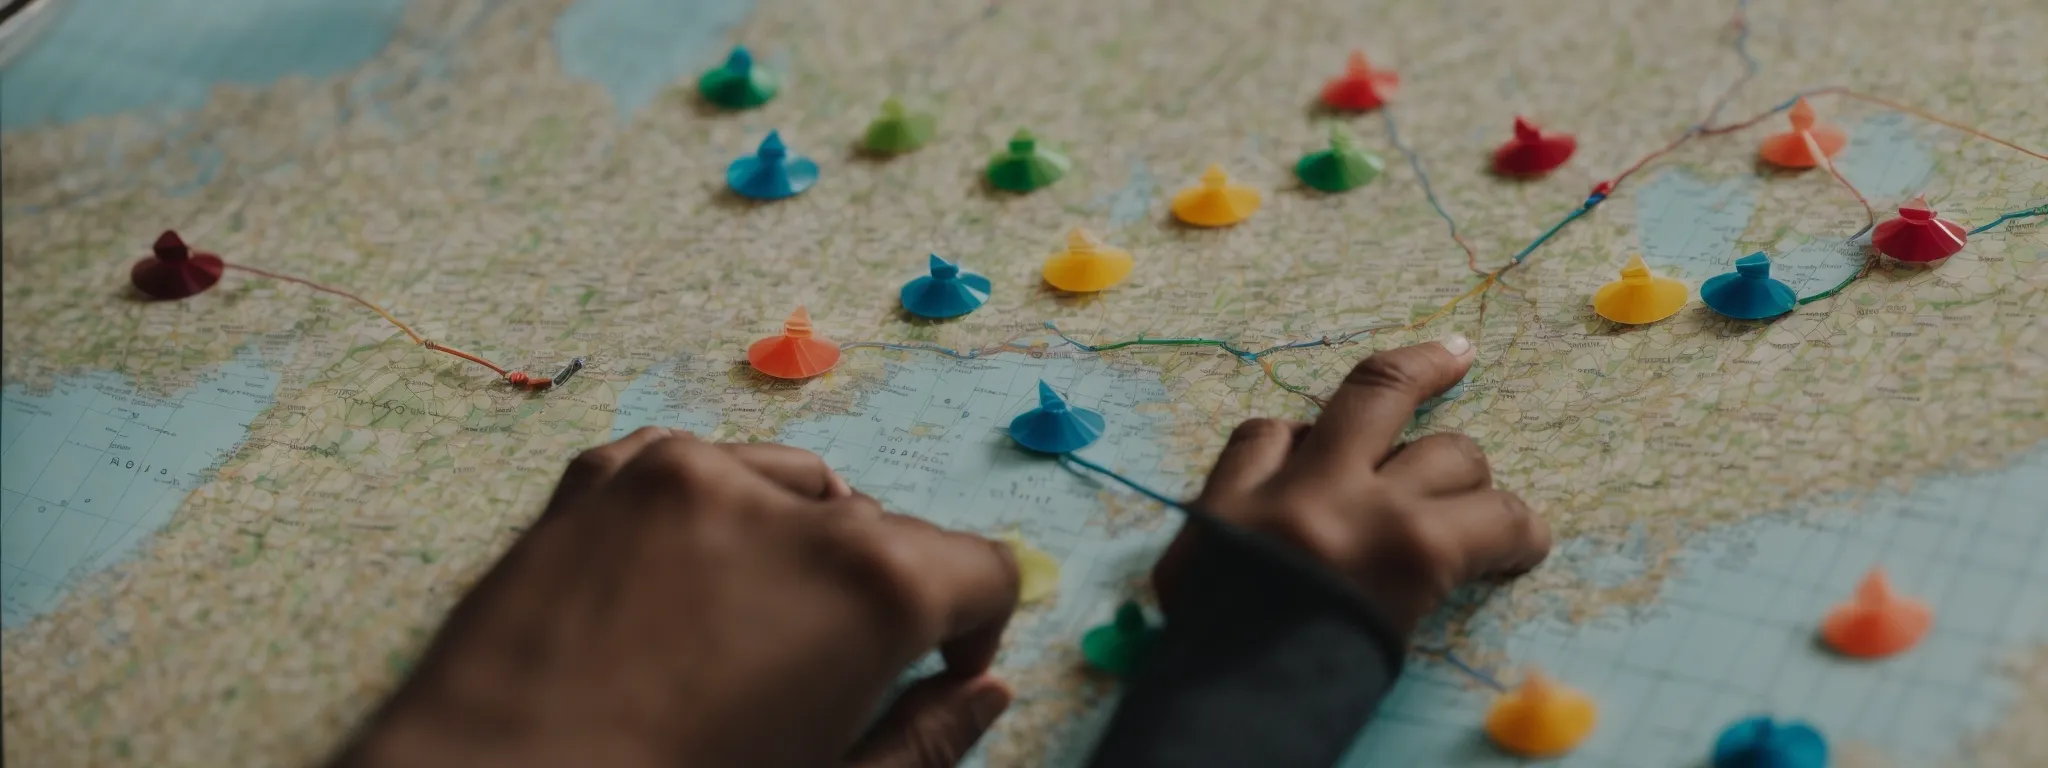 a detective examining a map with multiple colored pins and connecting threads, symbolizing a strategic audit.